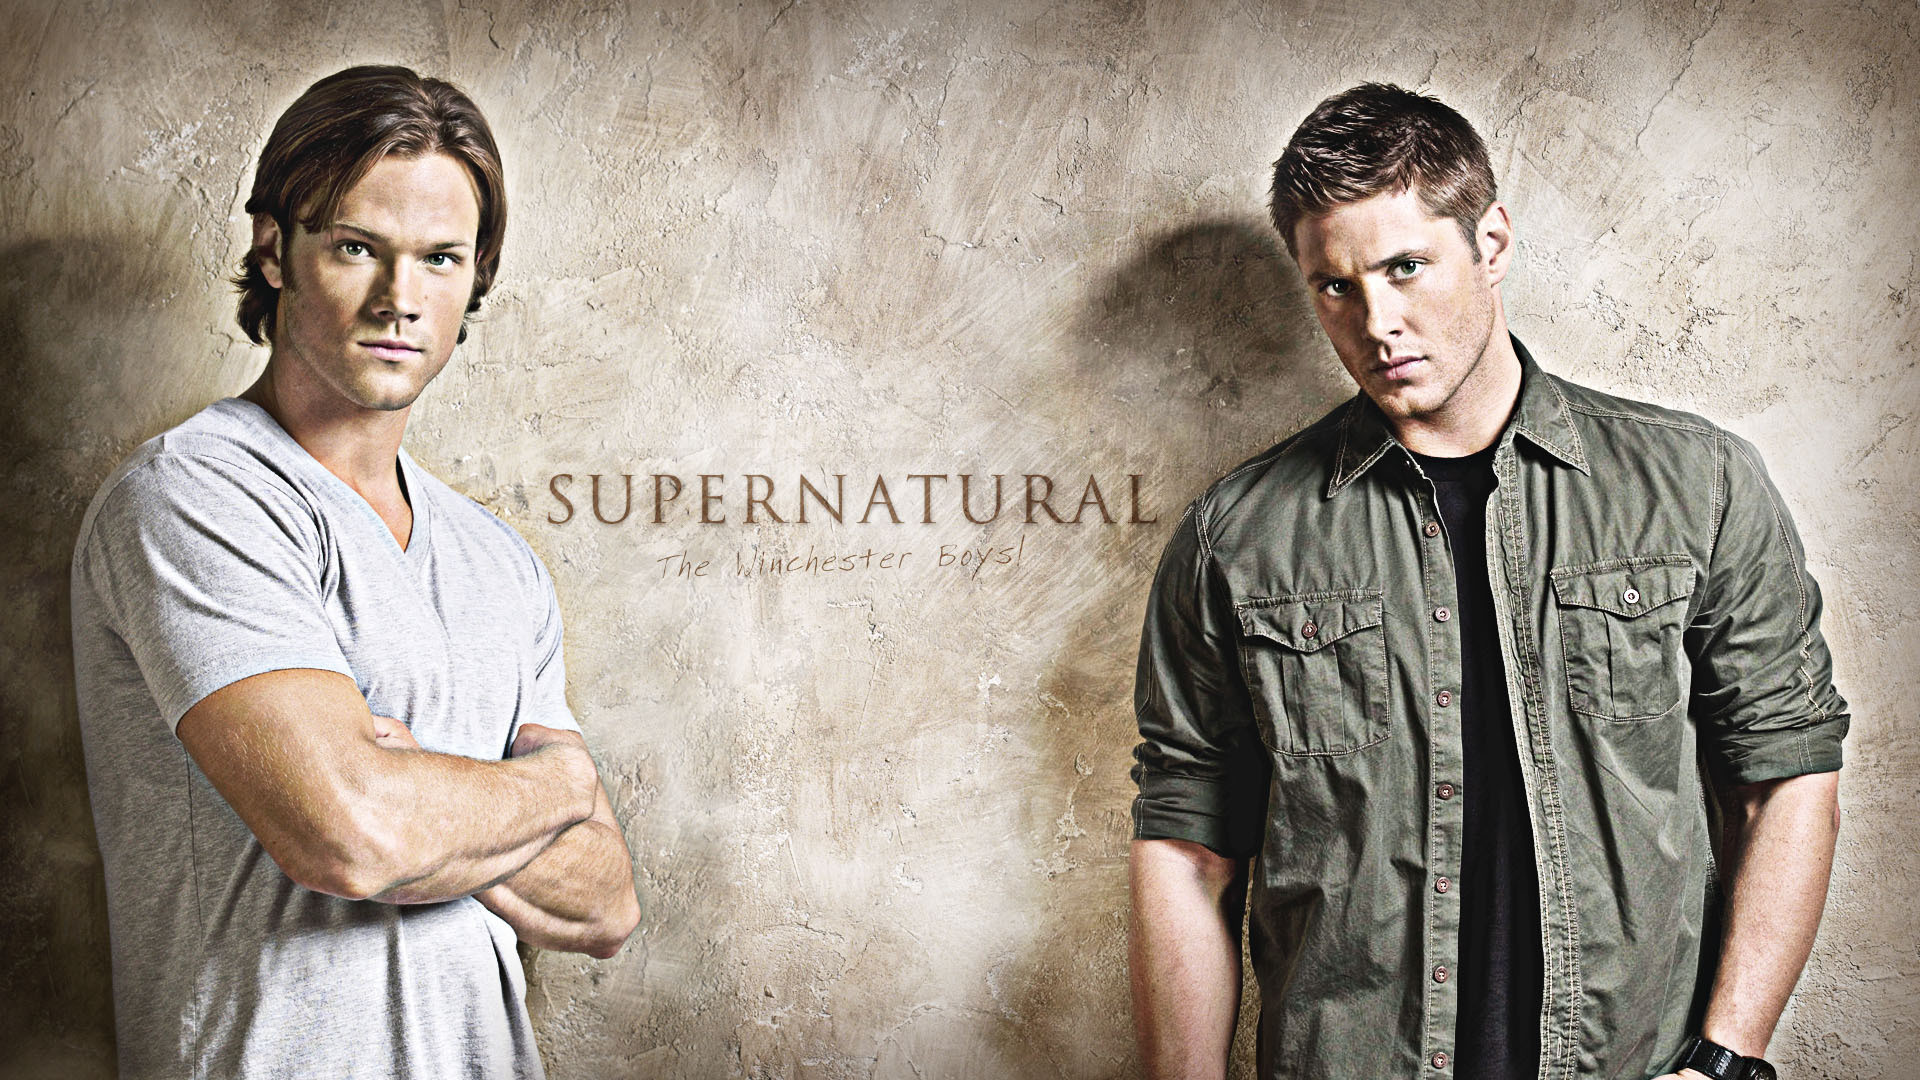 1920x1080 Supernatural images Winchester Boys HD HD wallpaper and background photos